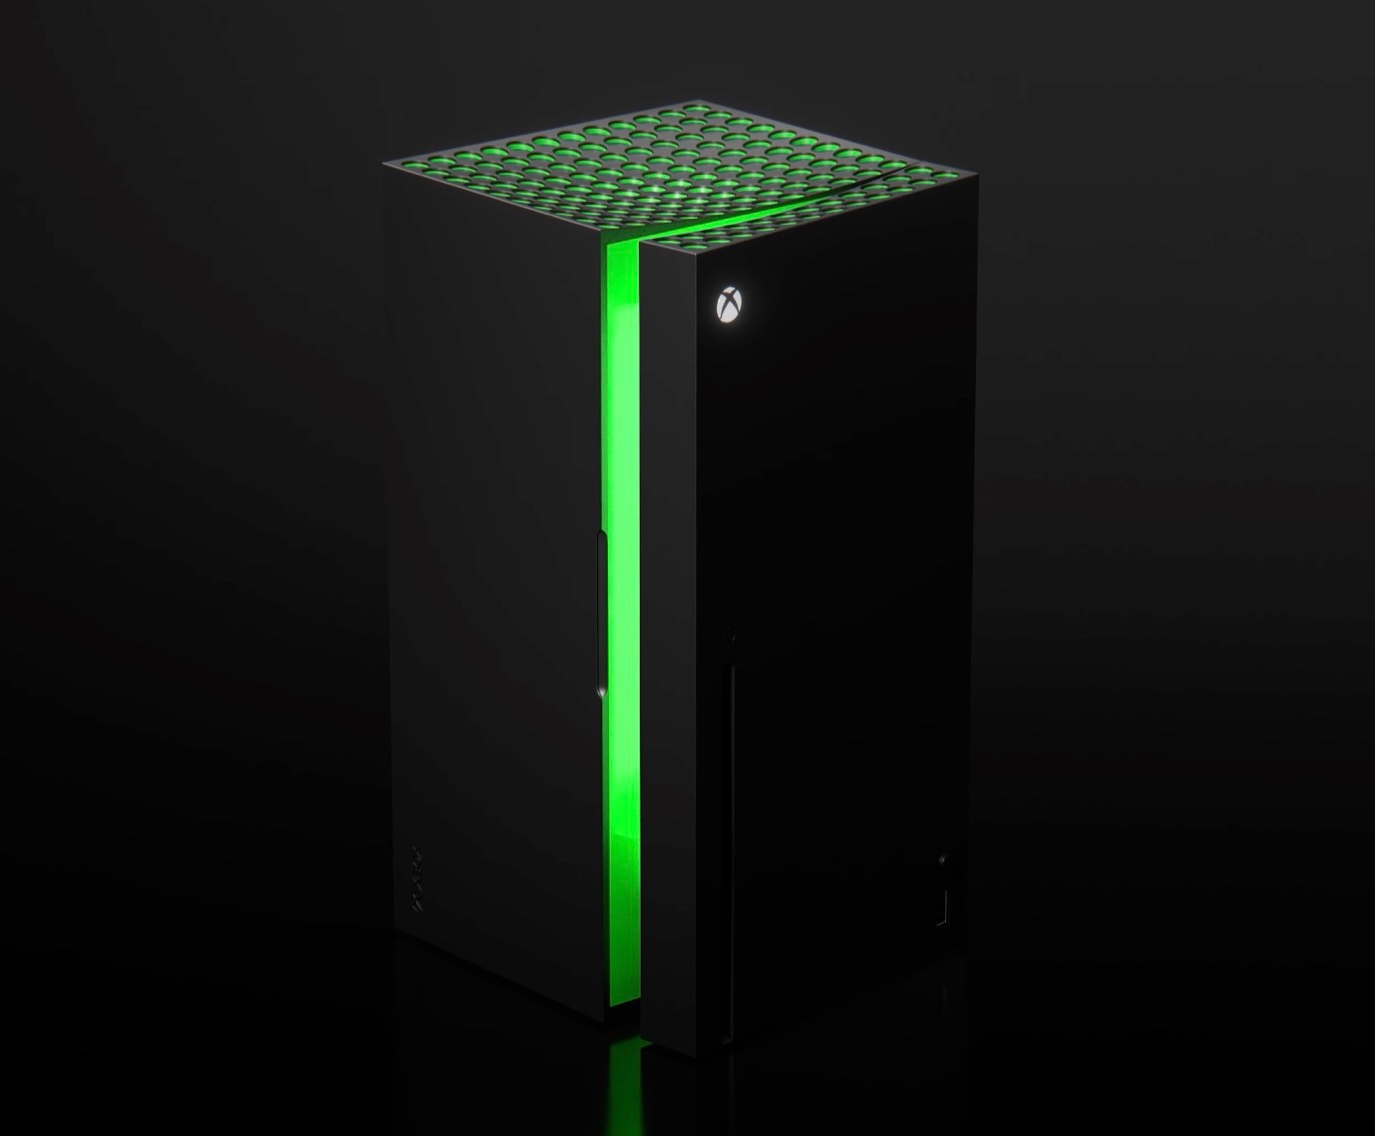 The legendary Xbox mini fridge is STILL only $40 after Cyber